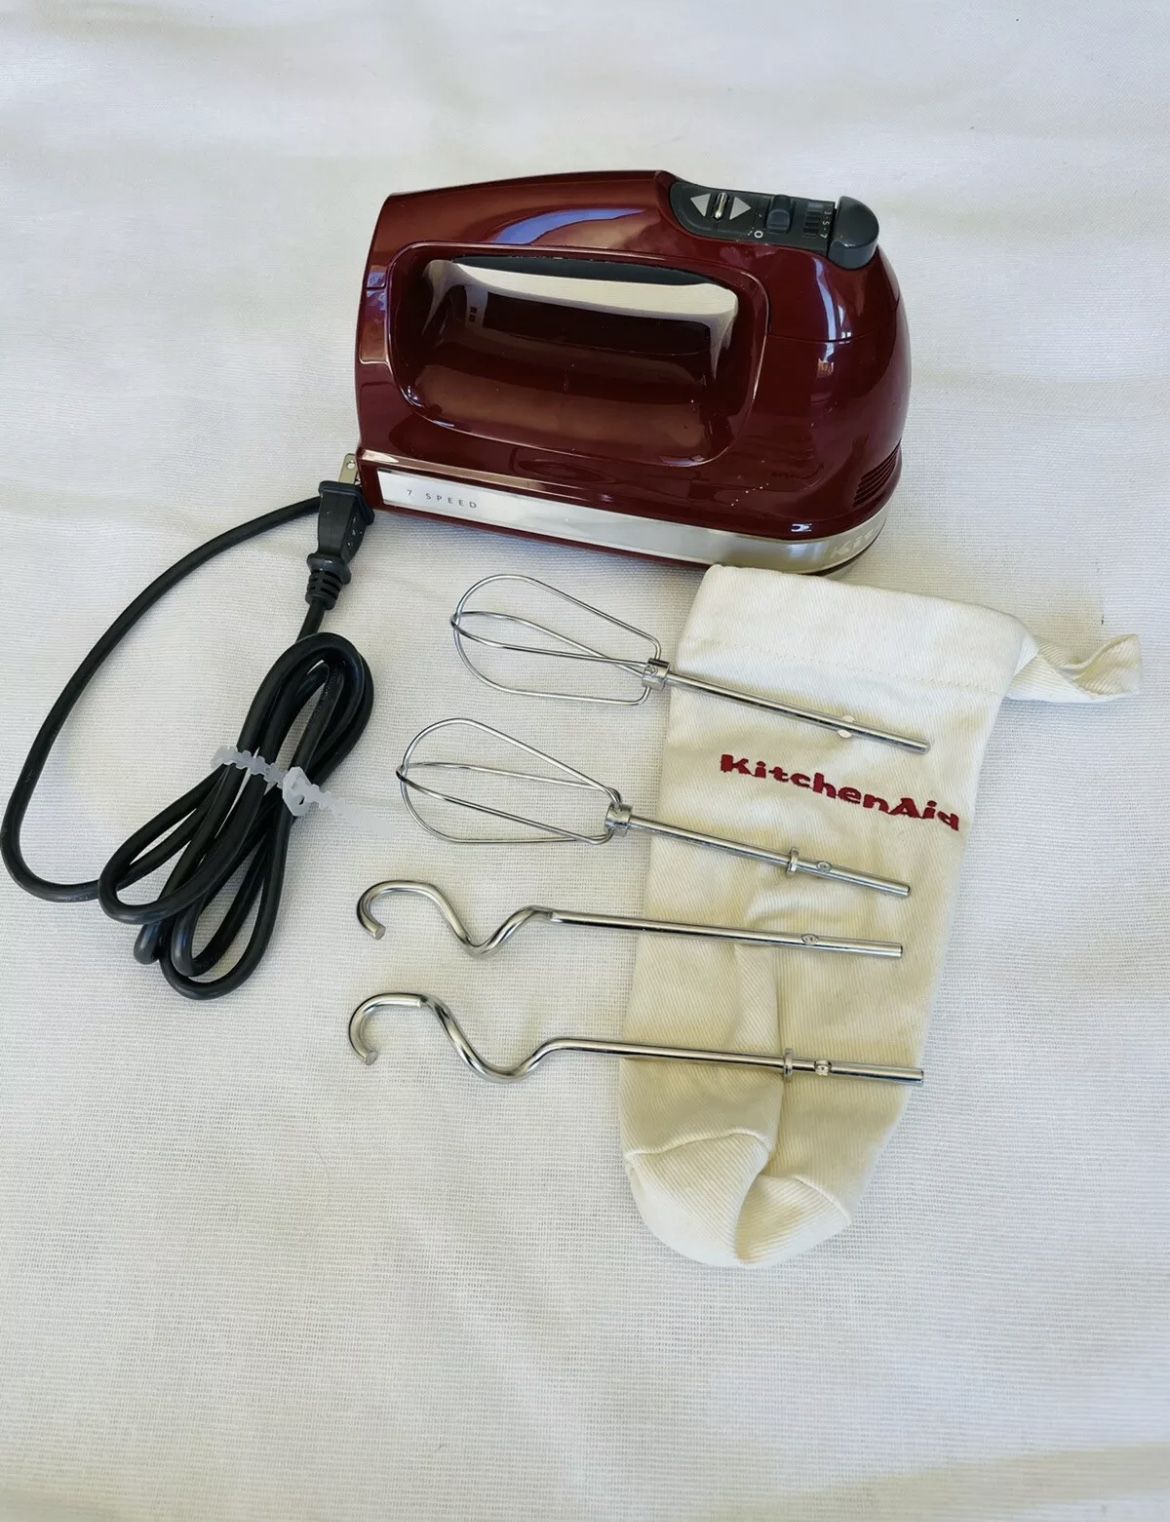 KitchenAid 7 Speed Hand Mixer for Sale in New York, NY - OfferUp